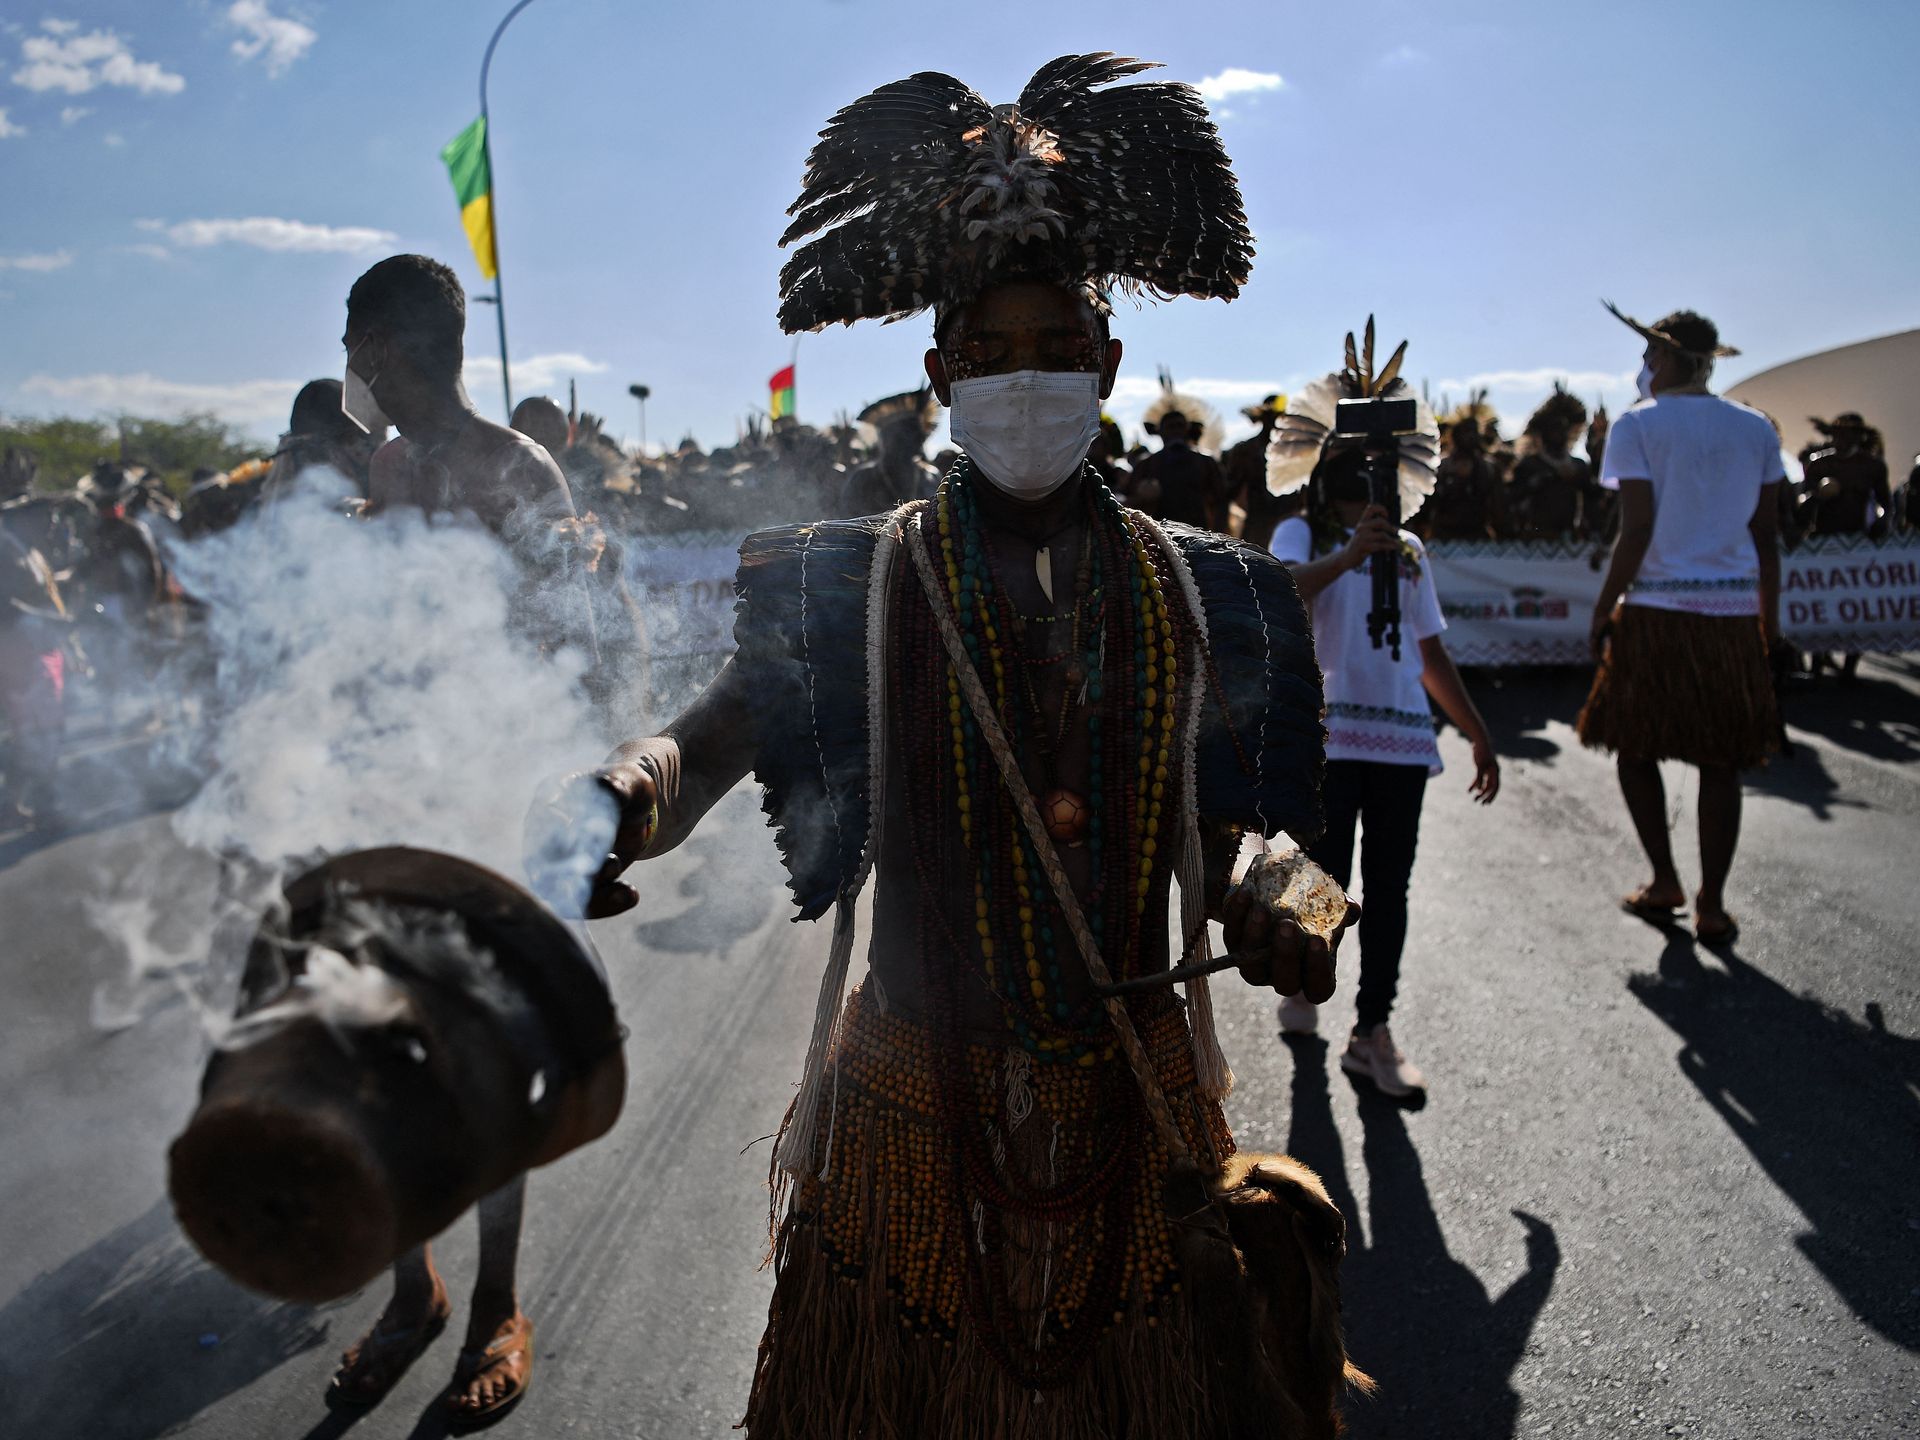 Indigenous people march for land rights in Brazil ahead of court ruling